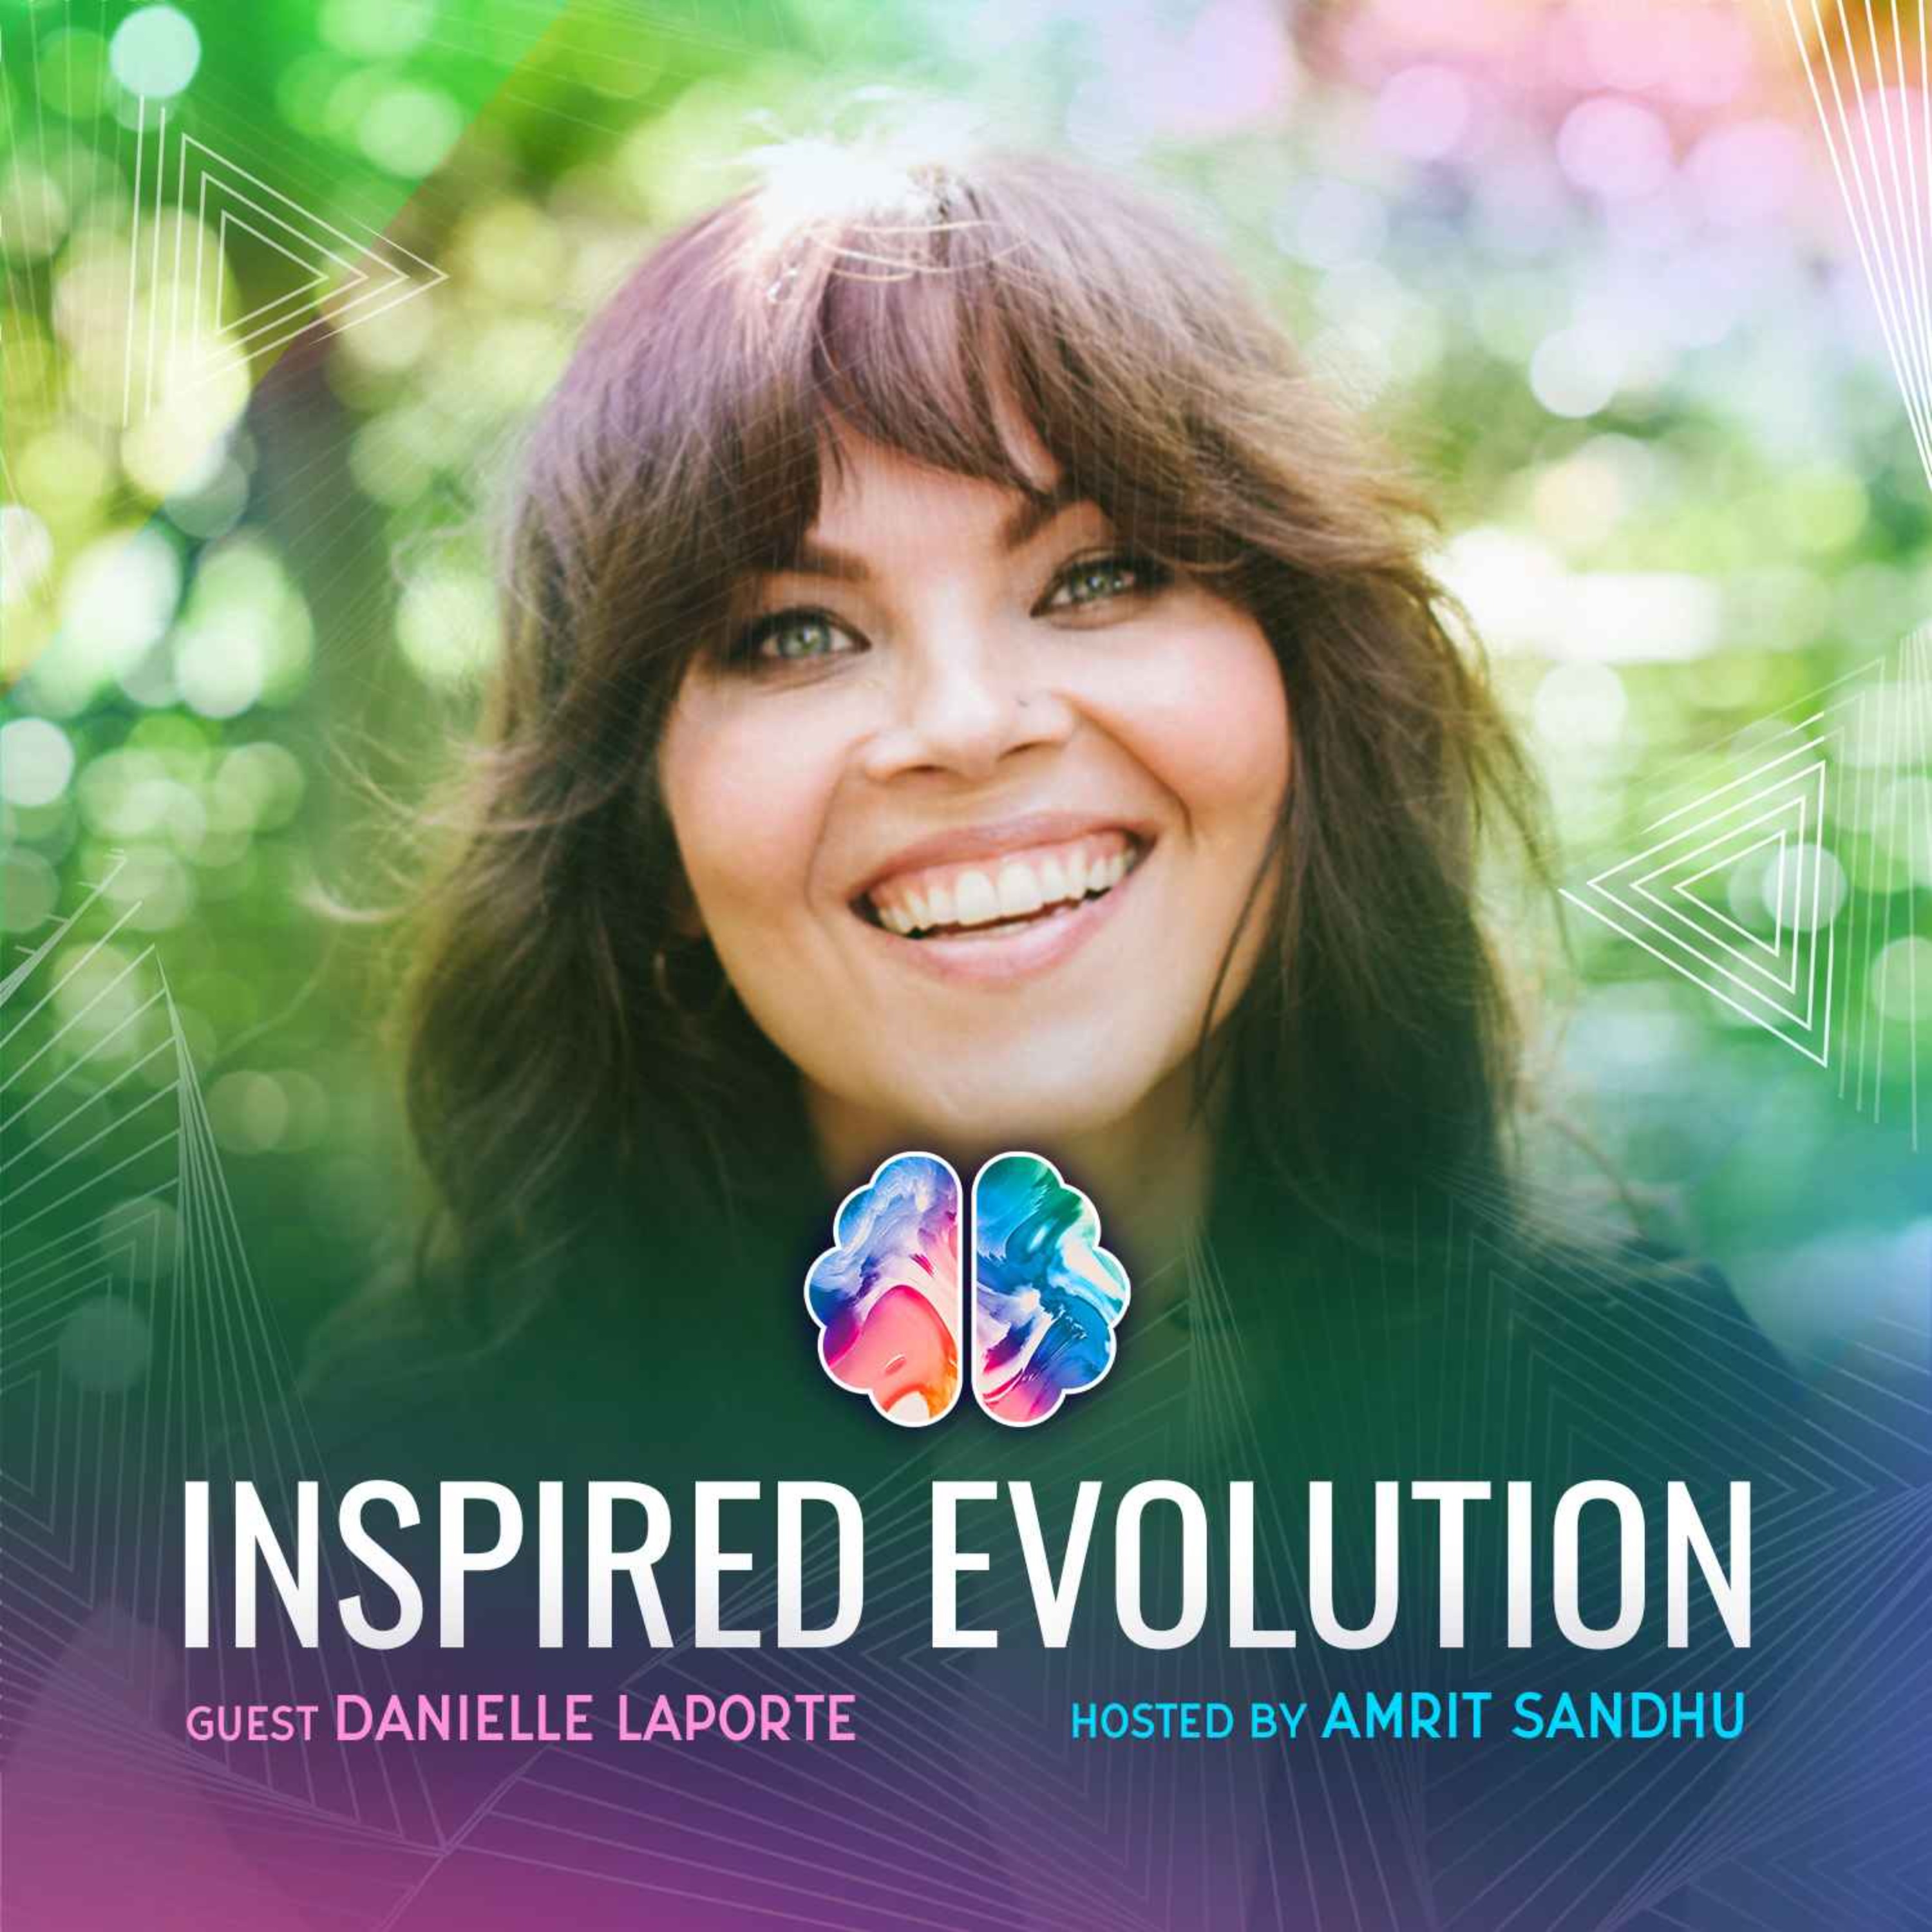 Danielle LaPorte: How to Be More Loving